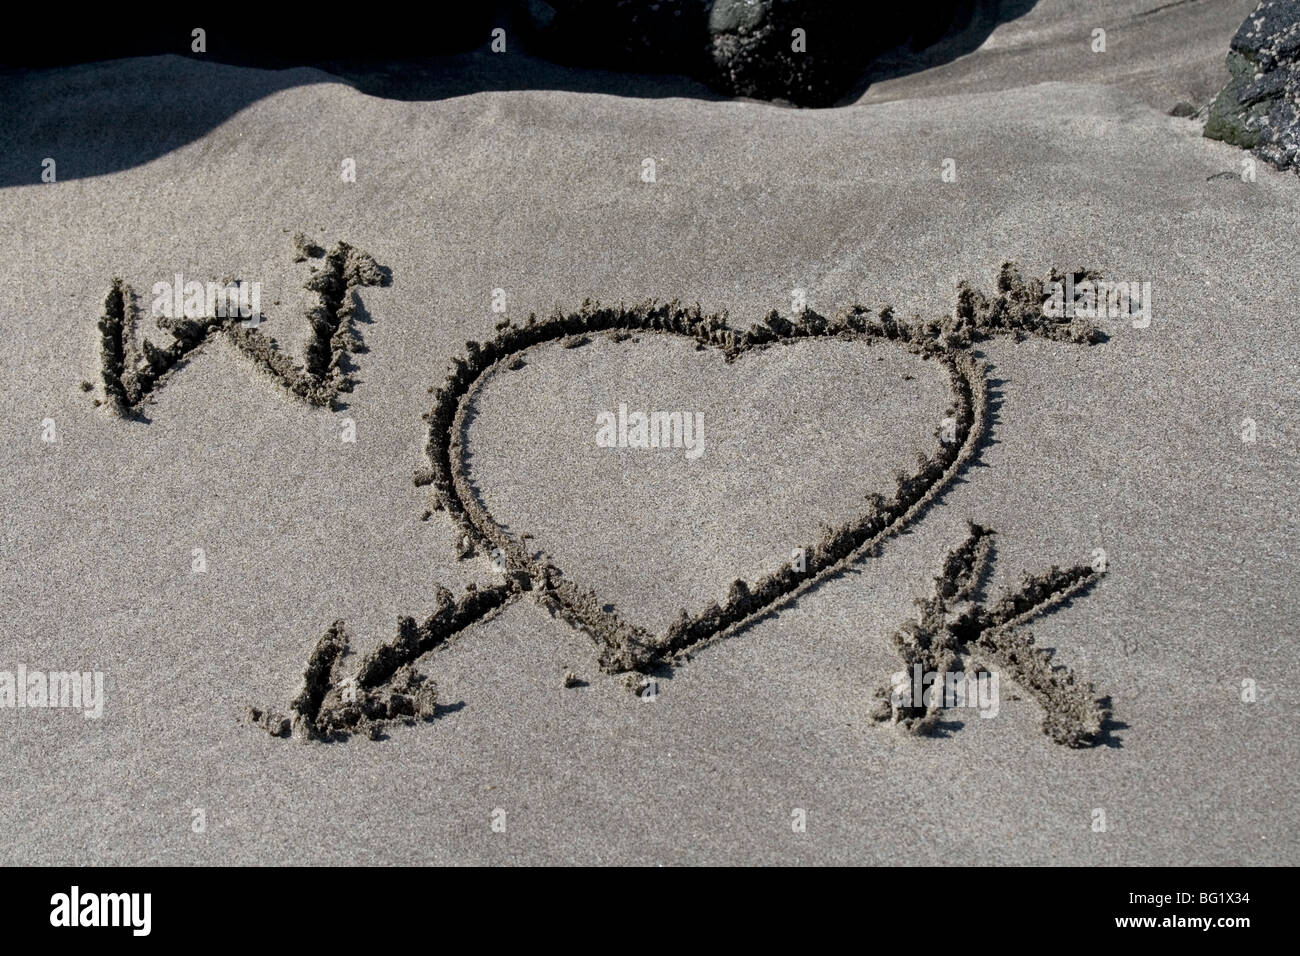 W and K, Prince William and Kate Middleton. Wills and Kate. A Royal romance. Love letters in the sand. Stock Photo